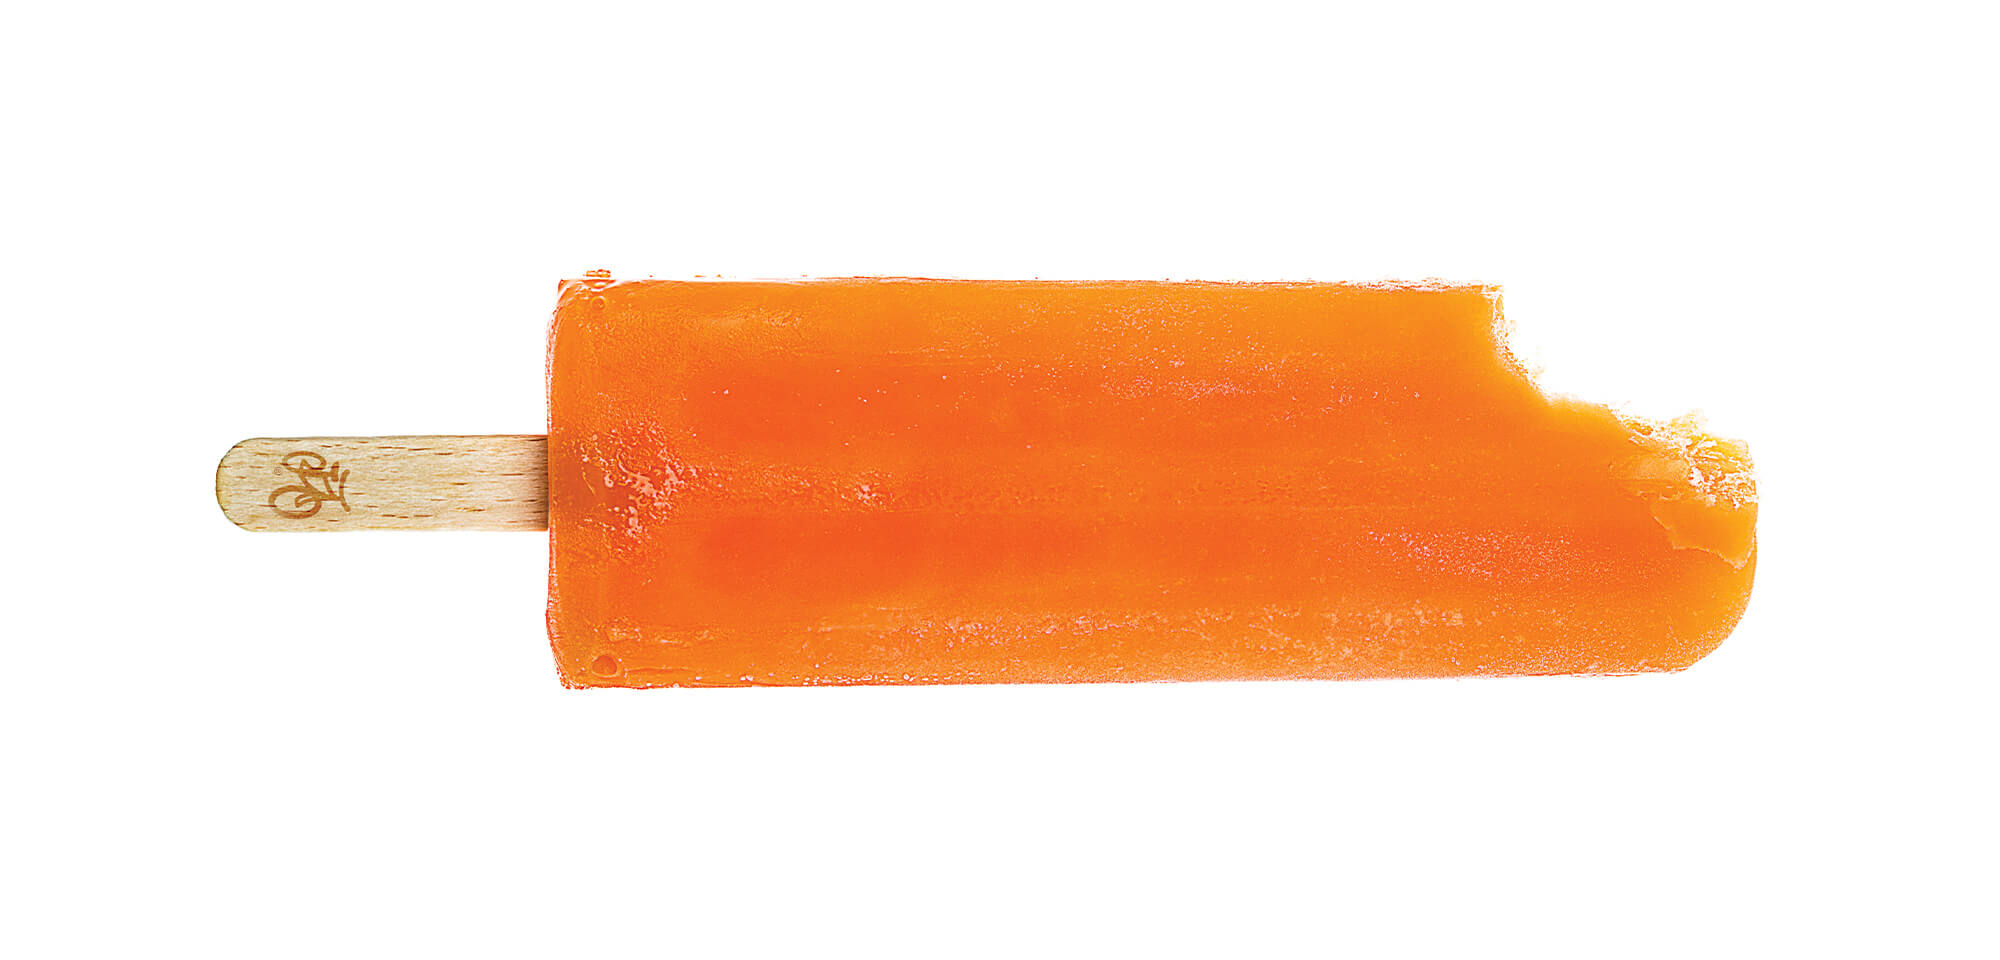 An orange popsicle with the Great Park Neighborhoods logo on the stick